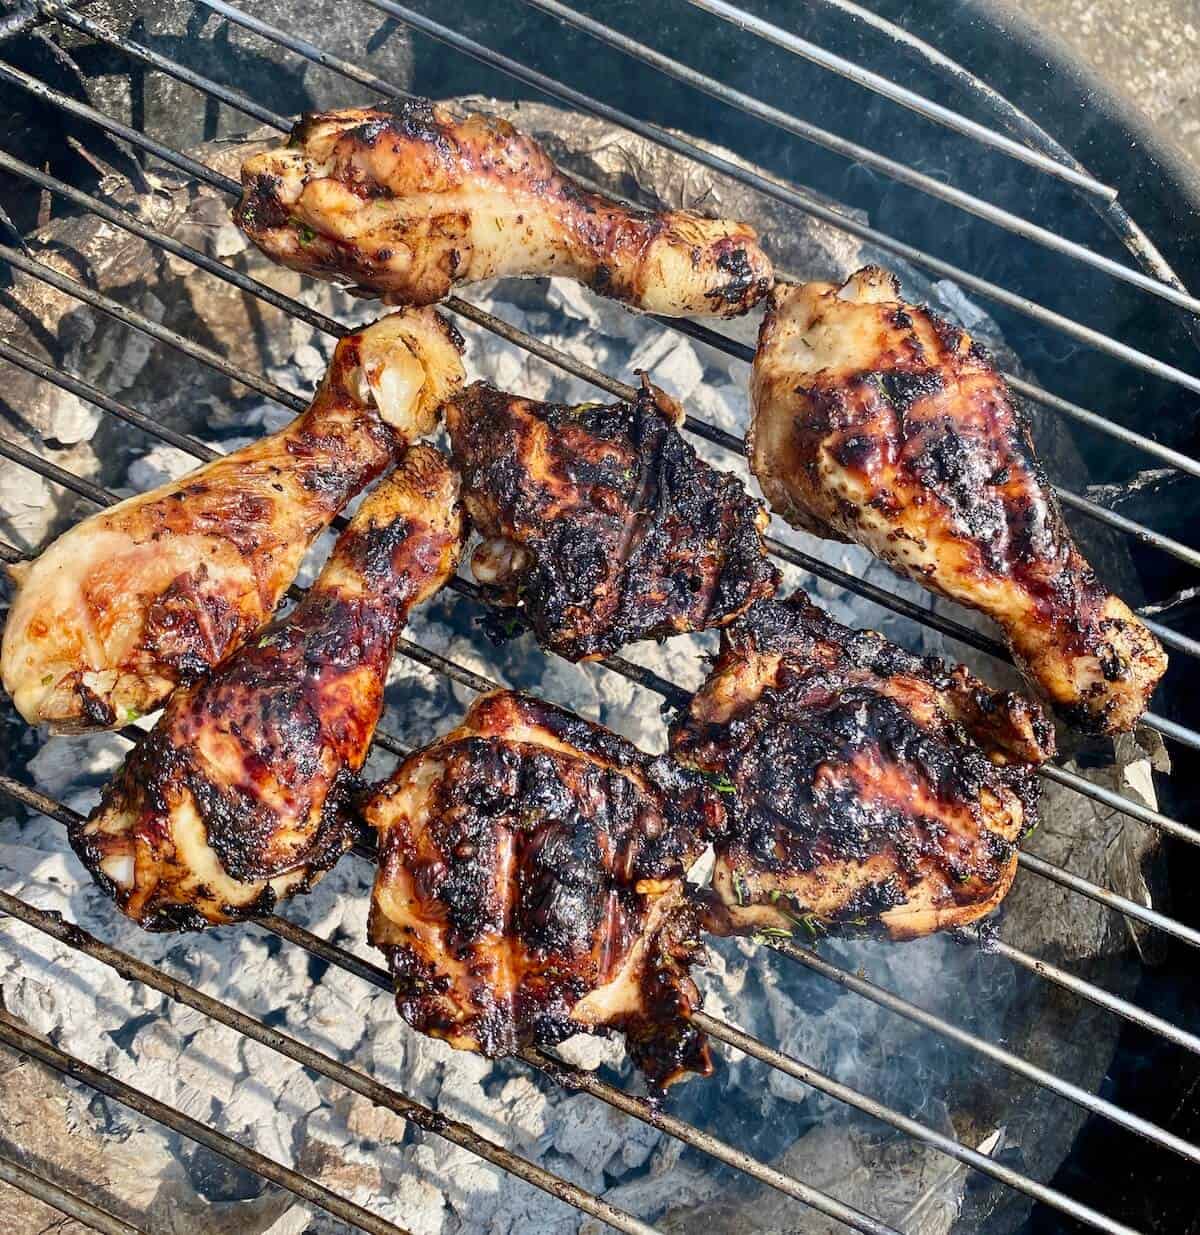 Black garlic chicken thighs and drumsticks cooking on a BBQ grill.